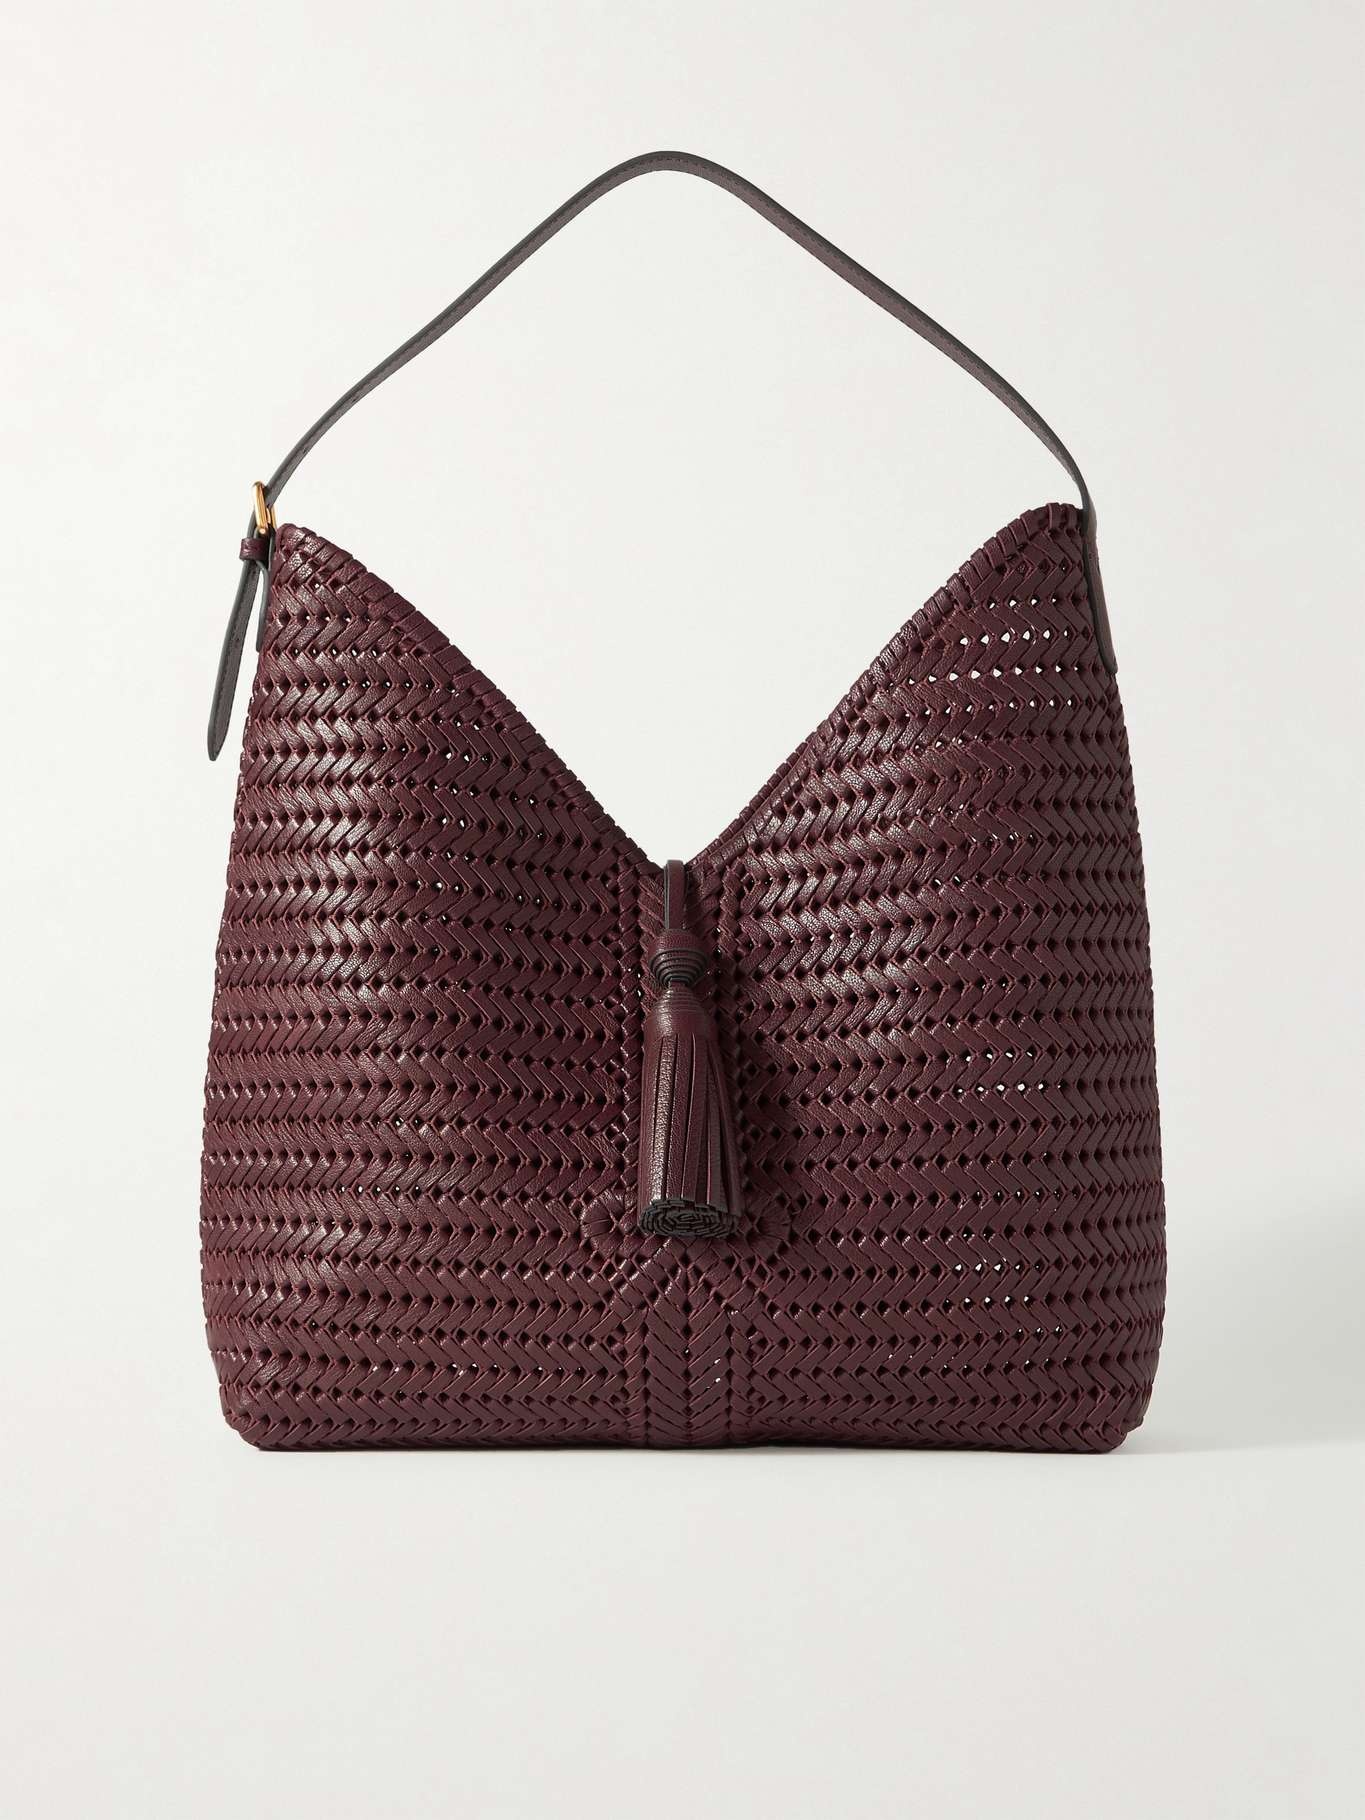 The Neeson tasseled woven leather tote - 1